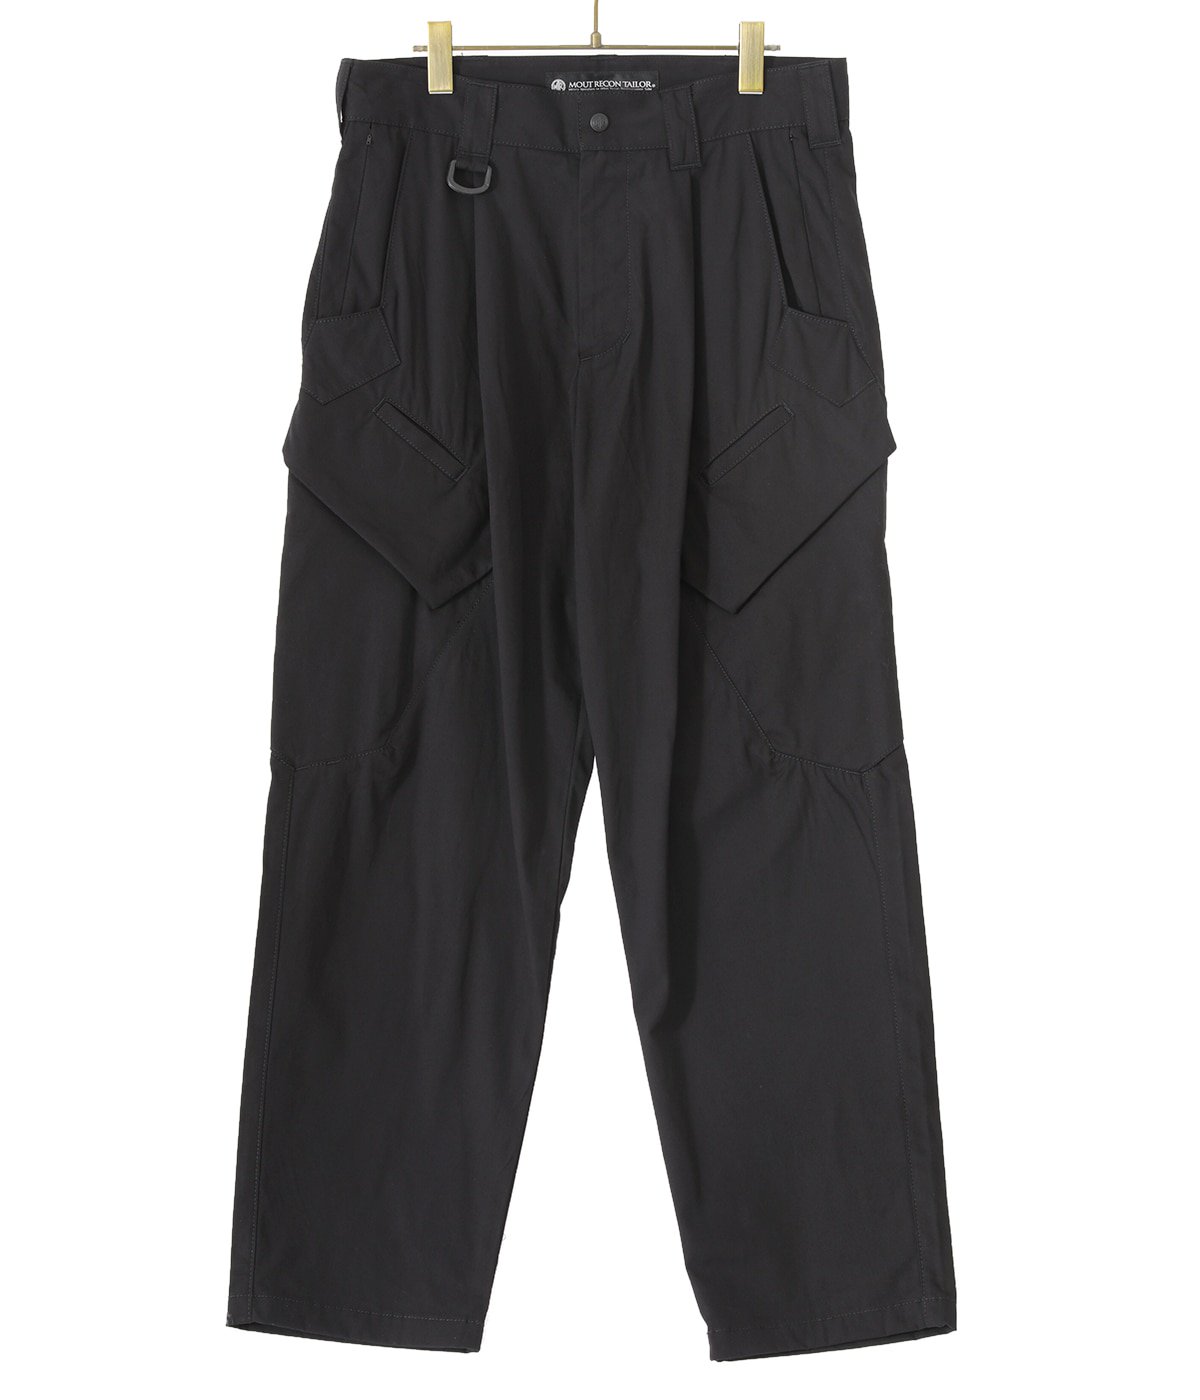 MDU PANTS GEN II | MOUT RECON TAILOR(マウトリーコンテーラー